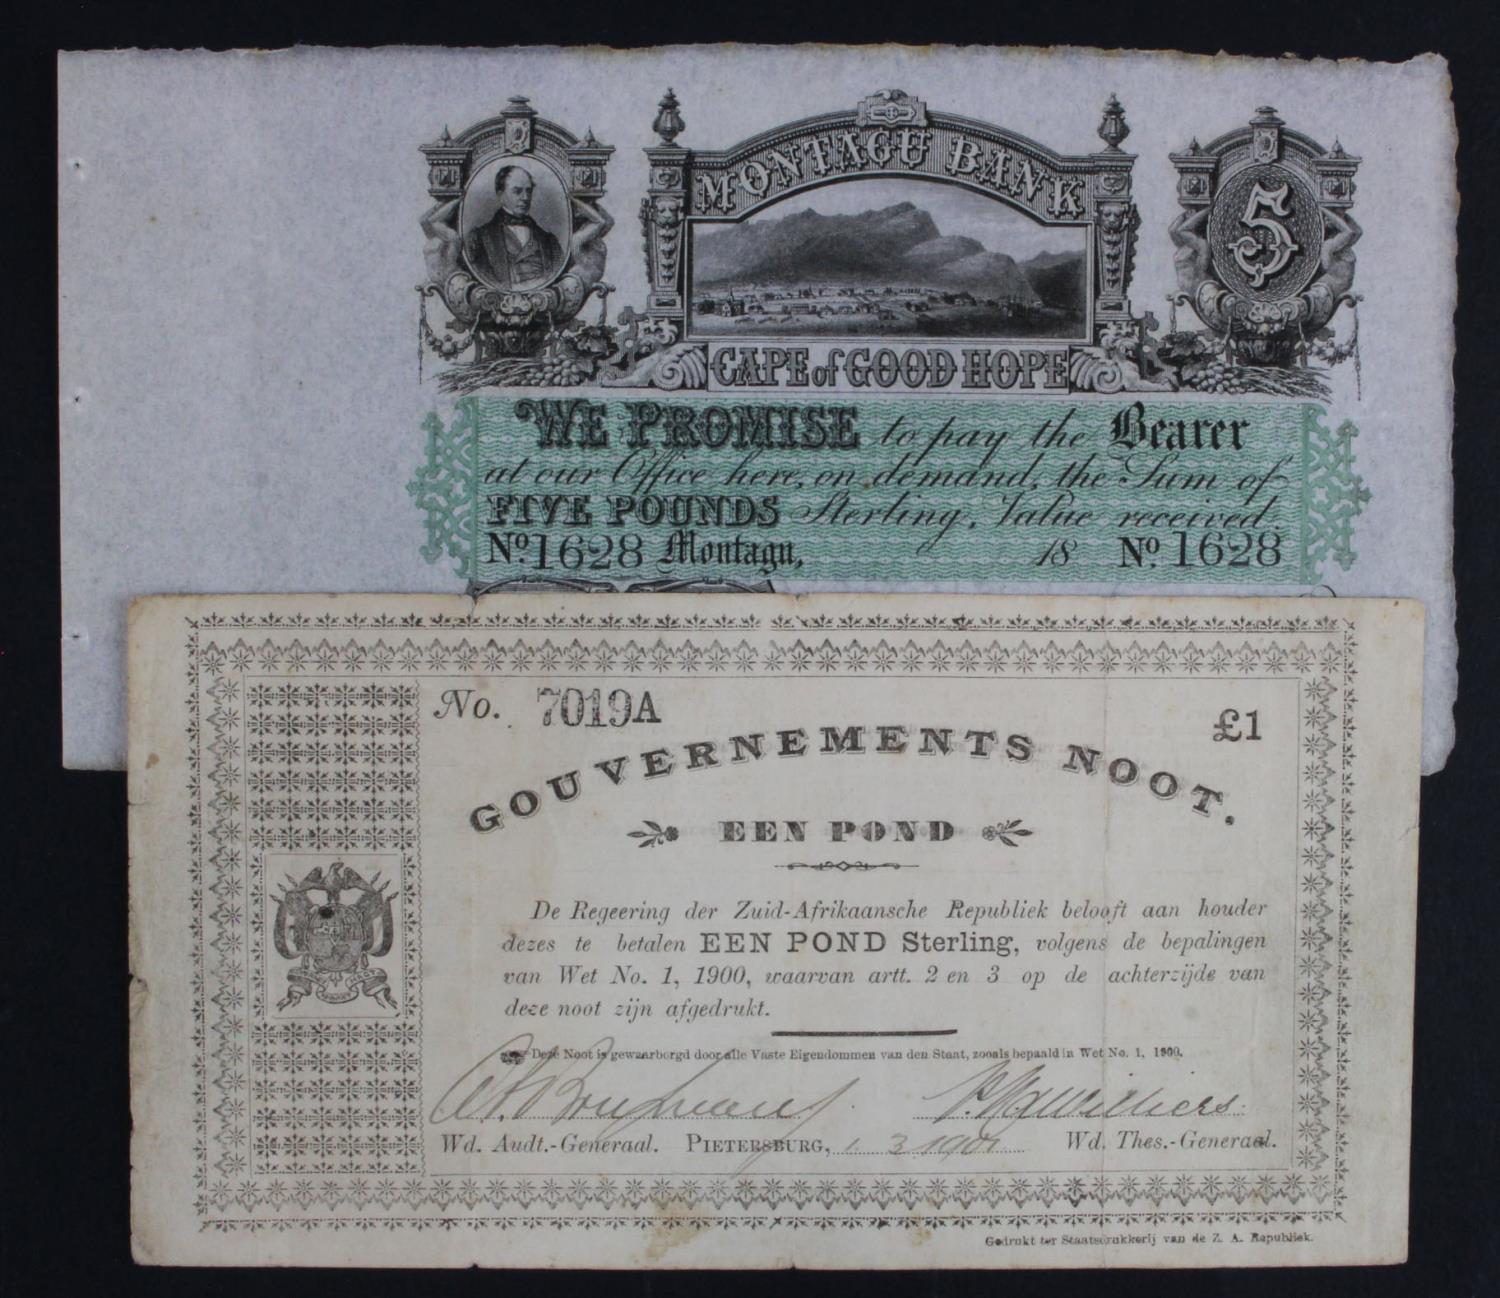 South Africa (2) 5 Pounds Montagu Bank, Cape of Good Hope dated 18xx, unsigned remainder no. 1628 (